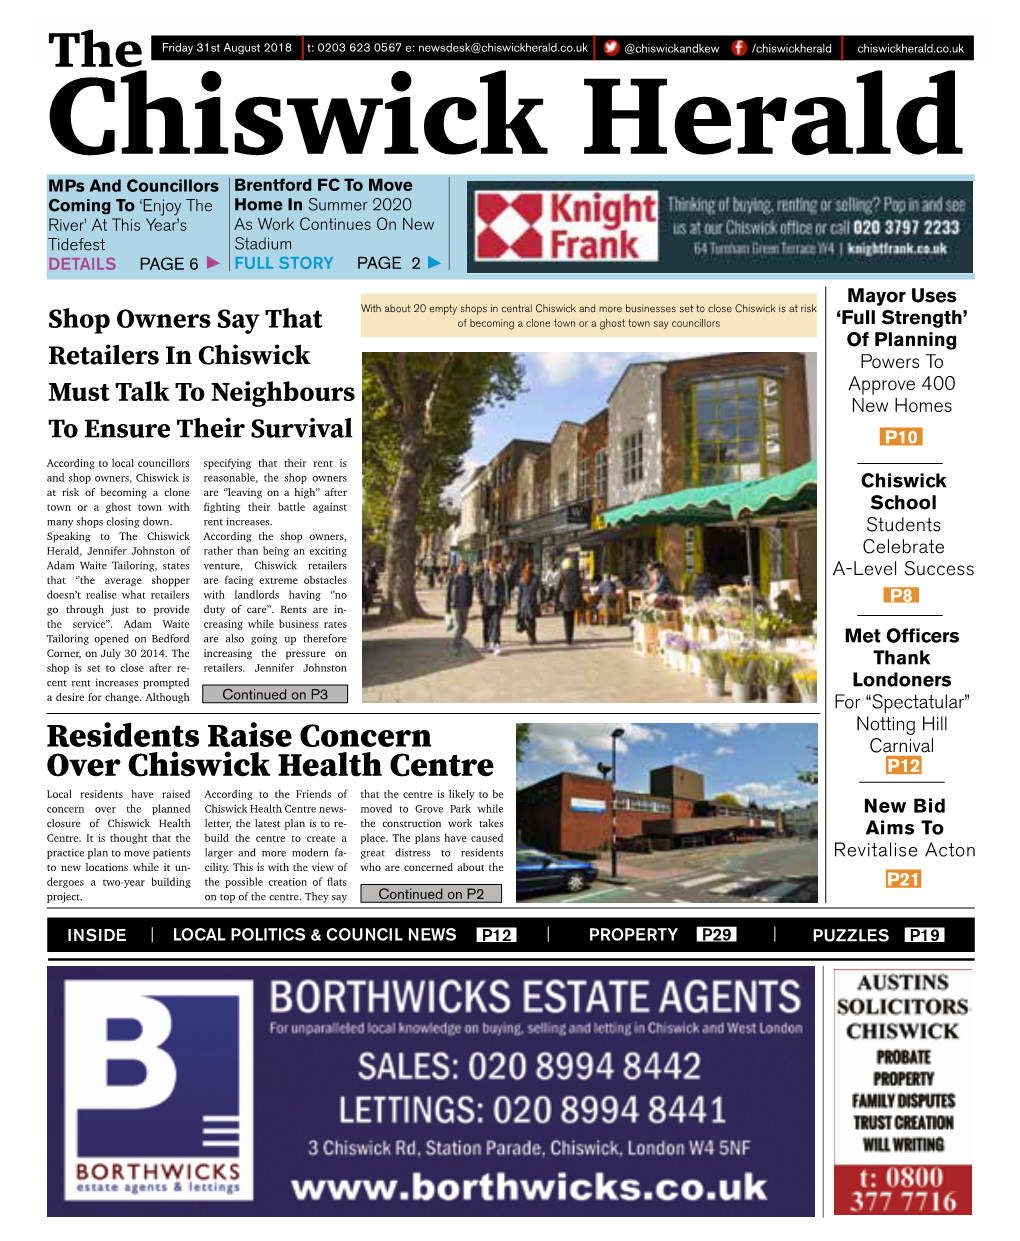 Residents Raise Concern Over Chiswick Health Centre